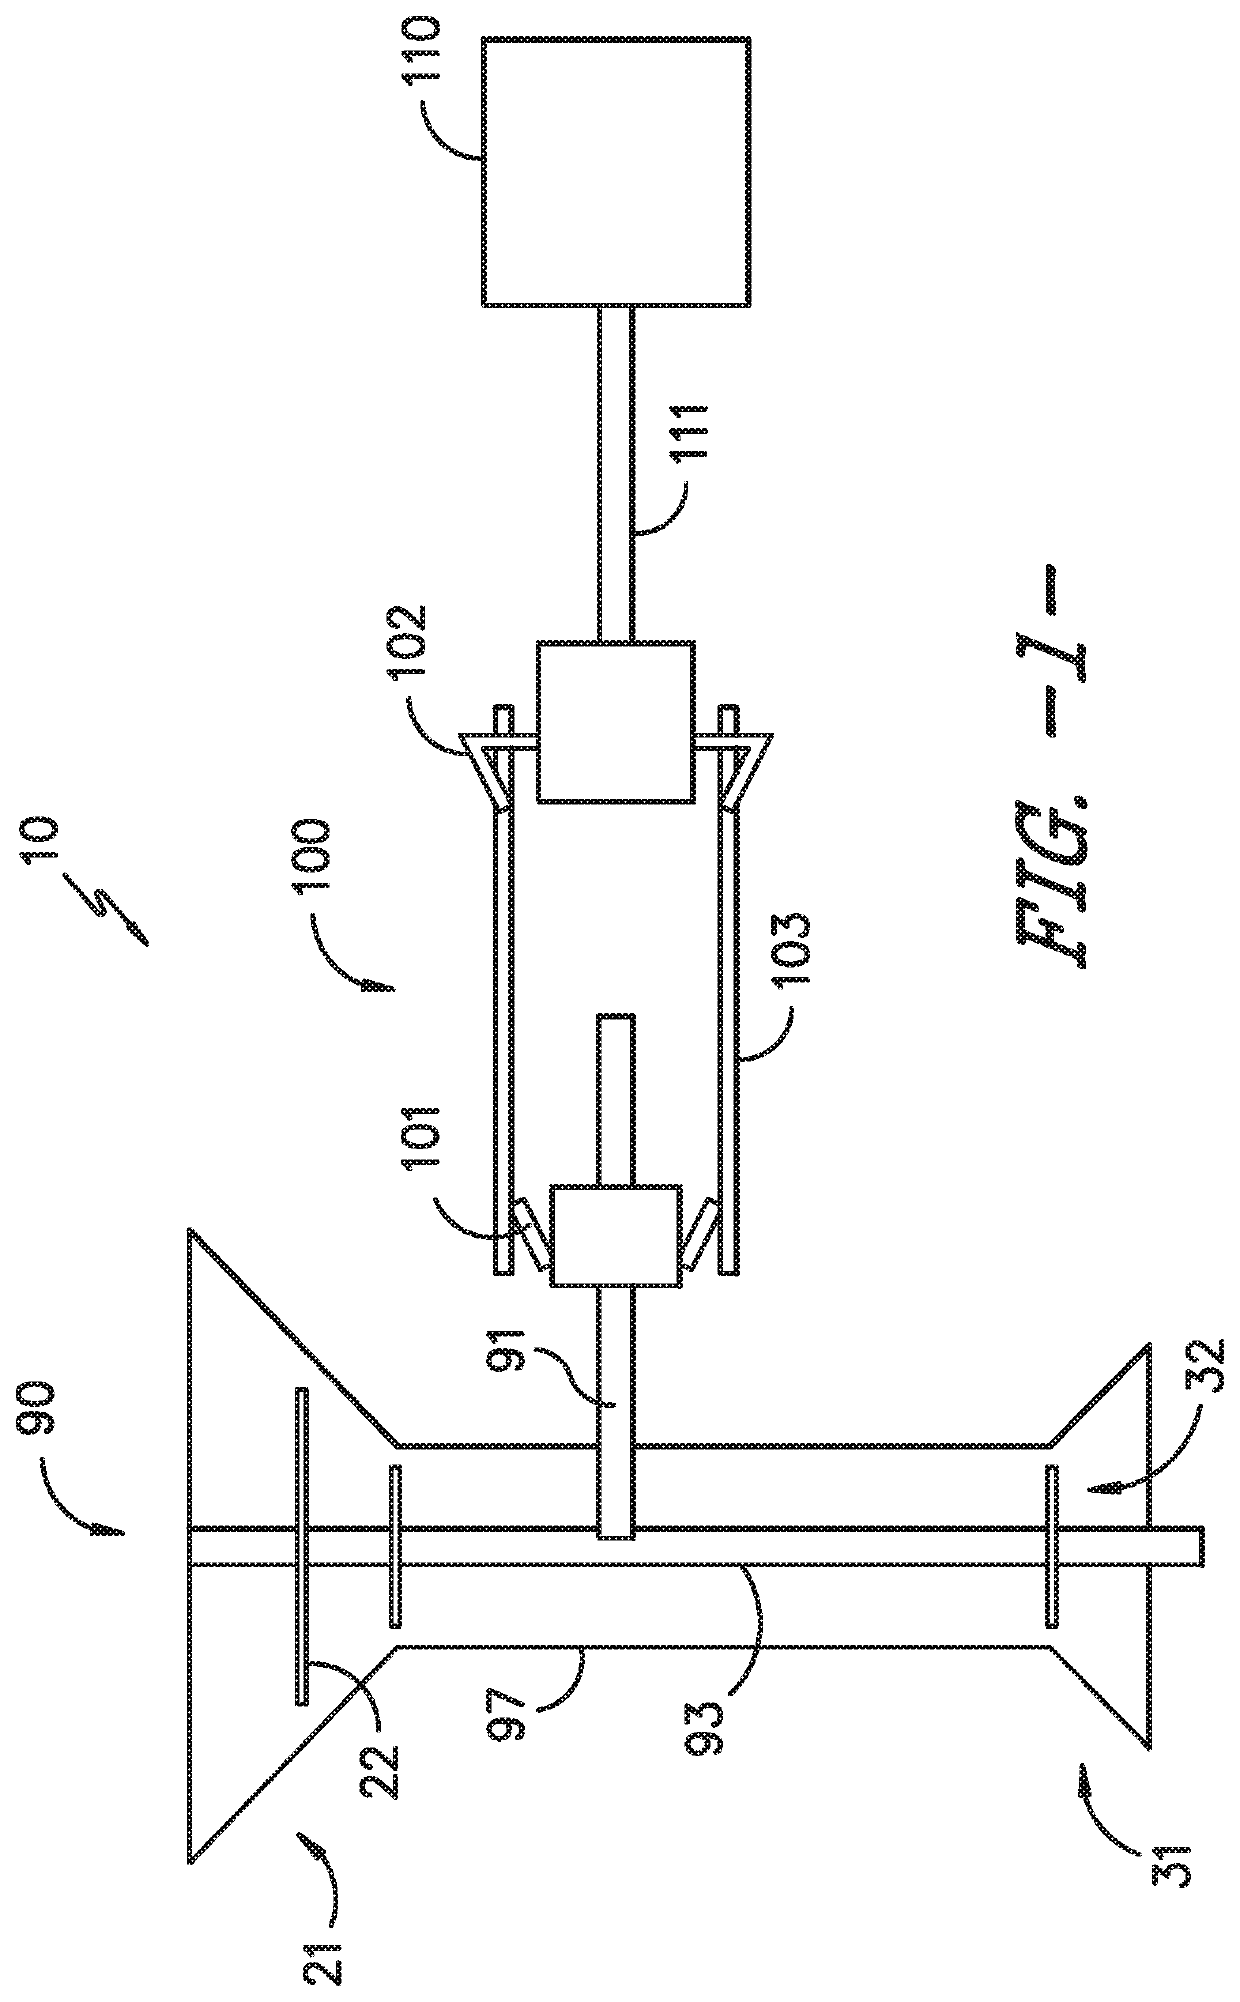 Method and system for mitigating bowed rotor operation of gas turbine engine